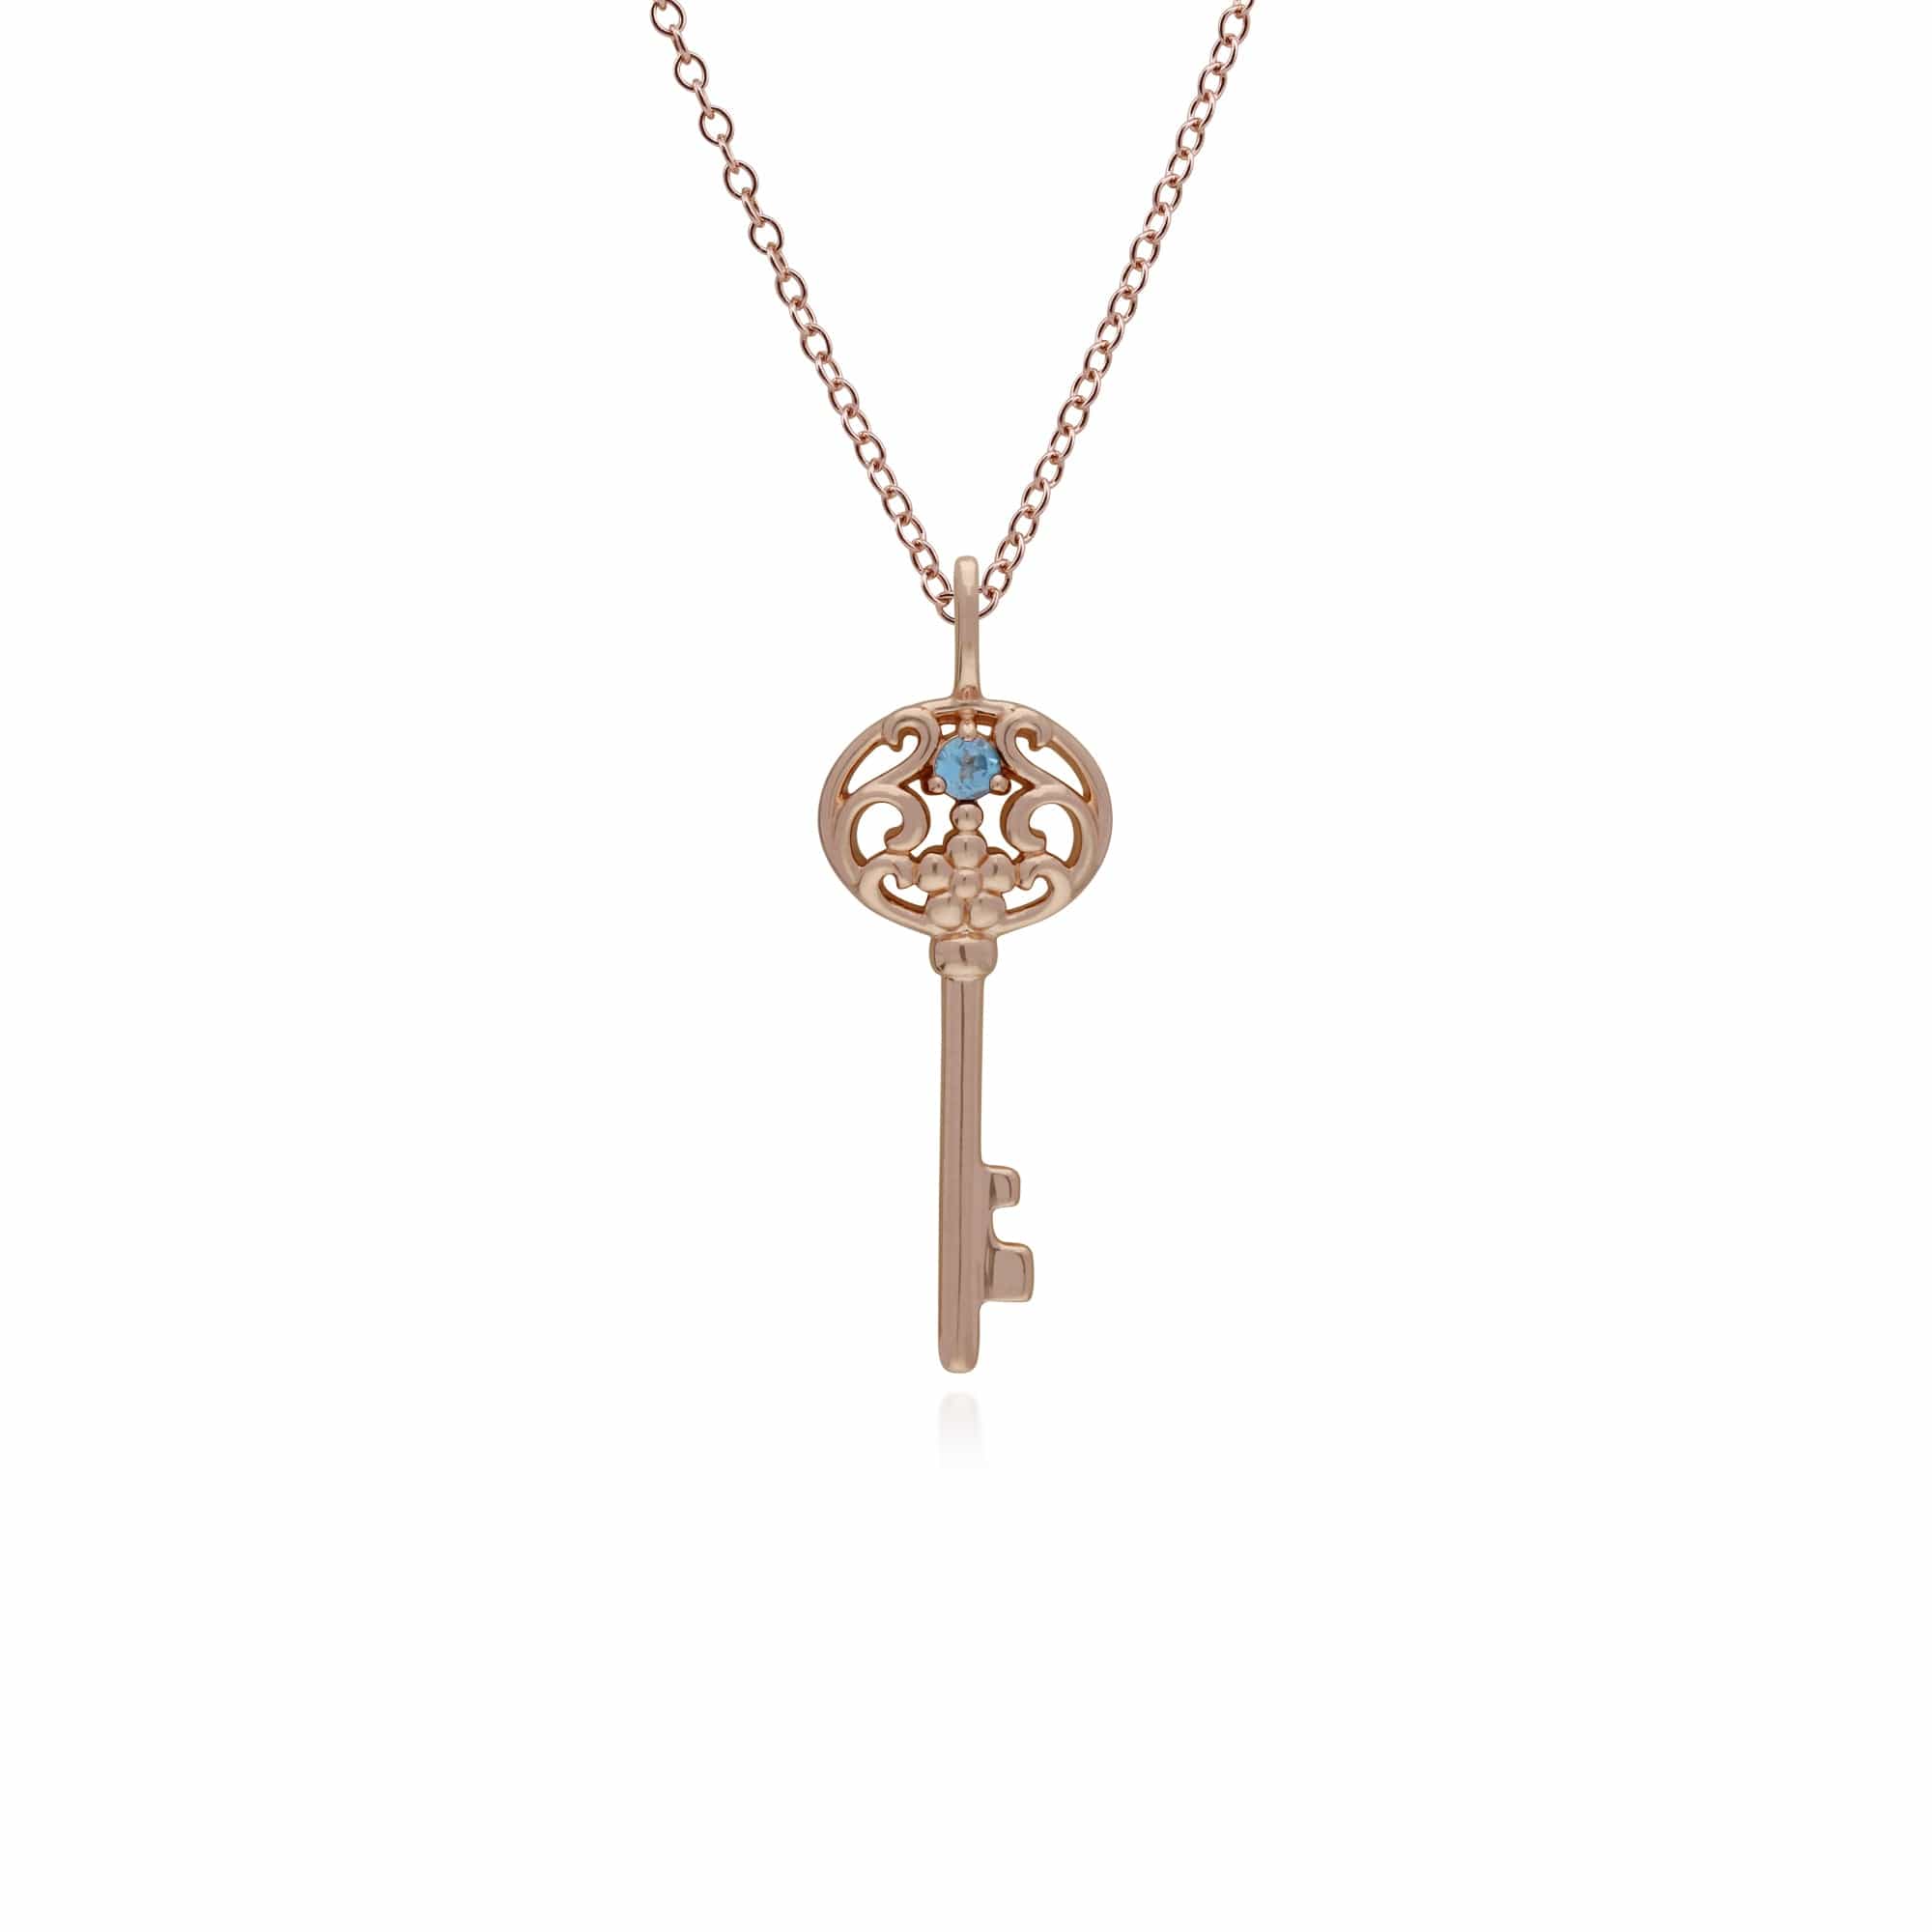 270P026706925-270P026501925 Classic Swirl Heart Lock Pendant & Blue Topaz Big Key Charm in Rose Gold Plated 925 Sterling Silver 2